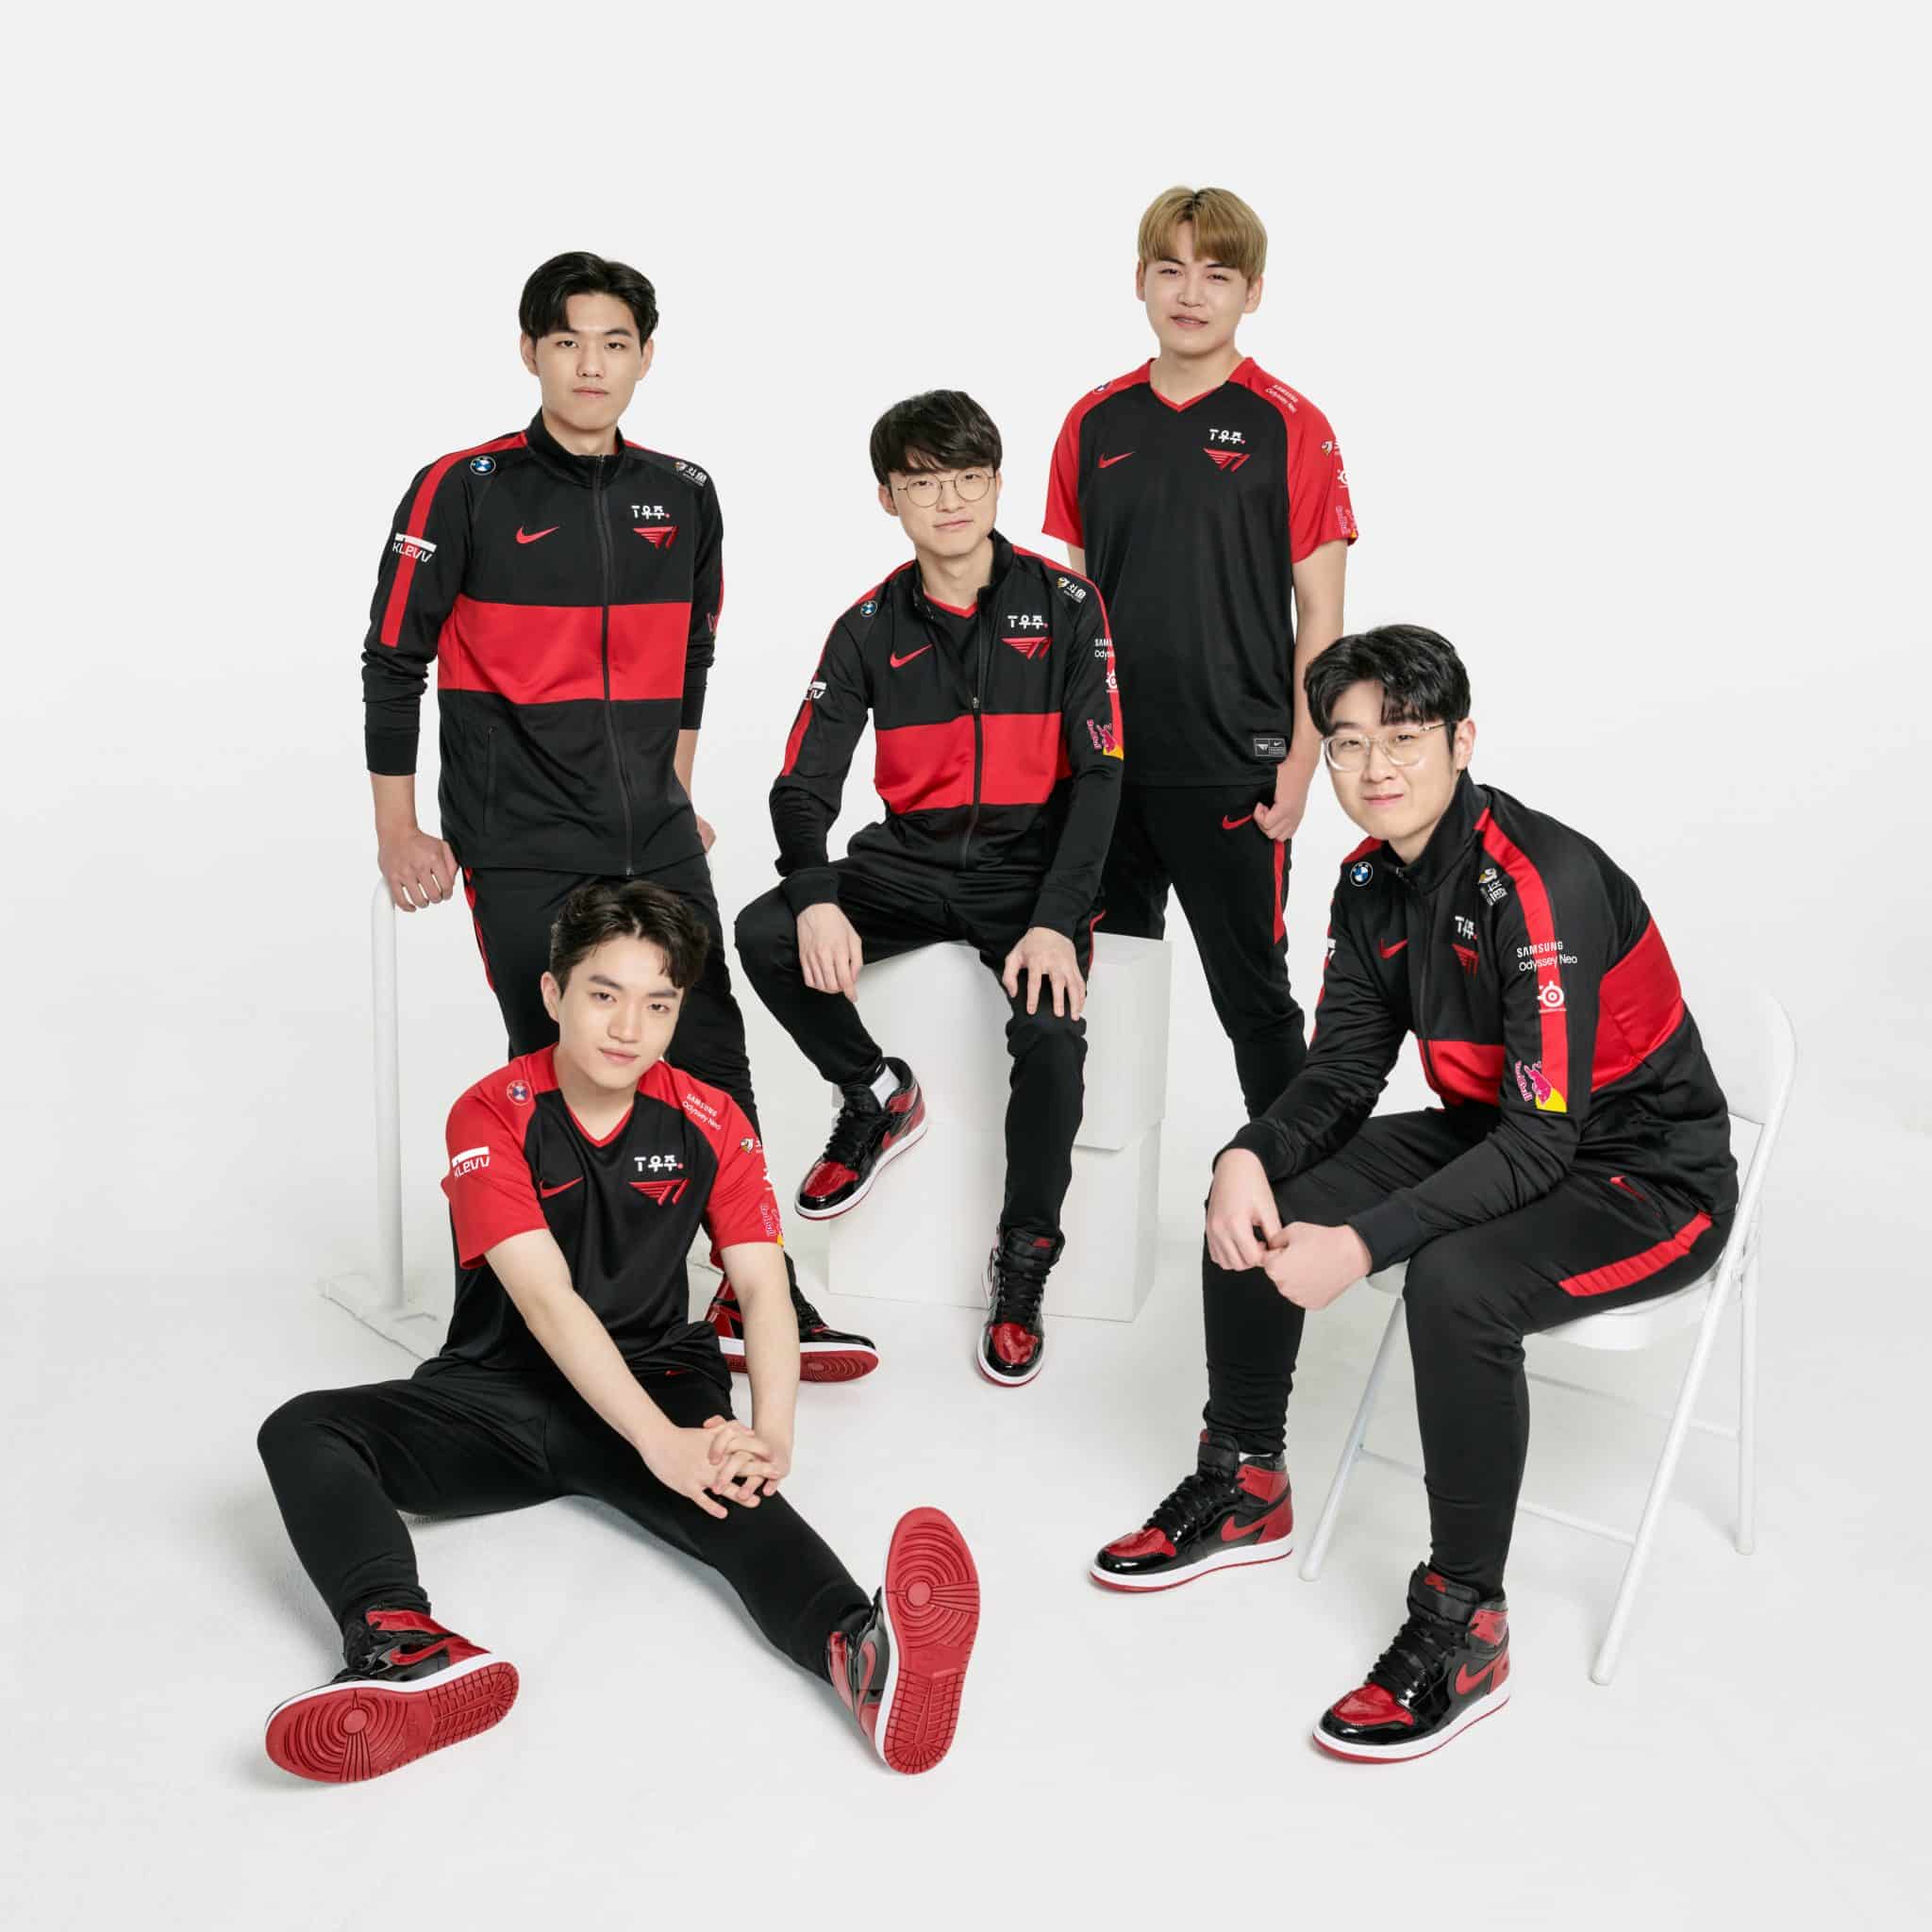 T1's League of Legends team decked out in Nike apparel against a white background